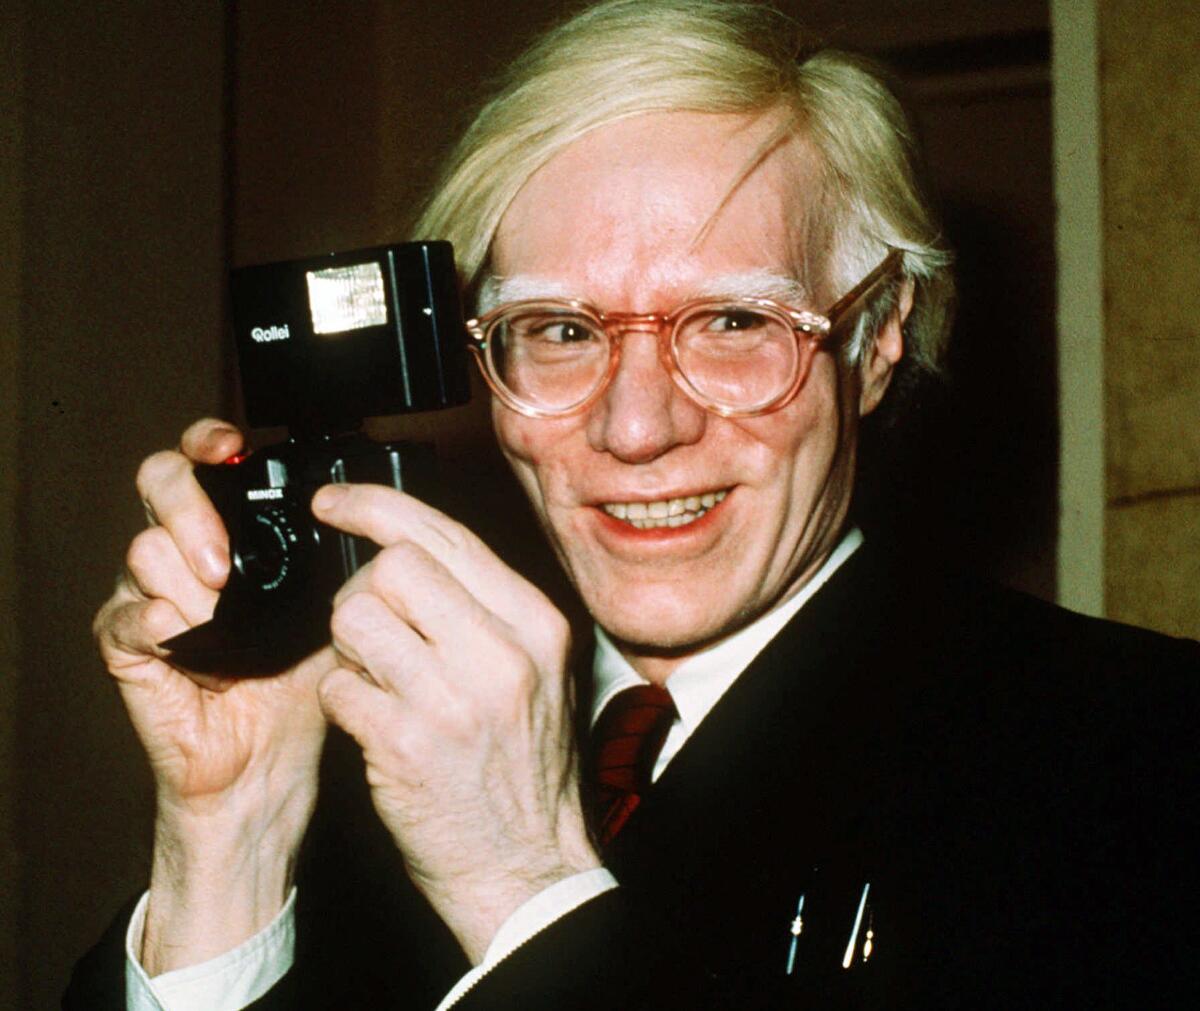 Andy Warhol holds a camera and smiles in 1976